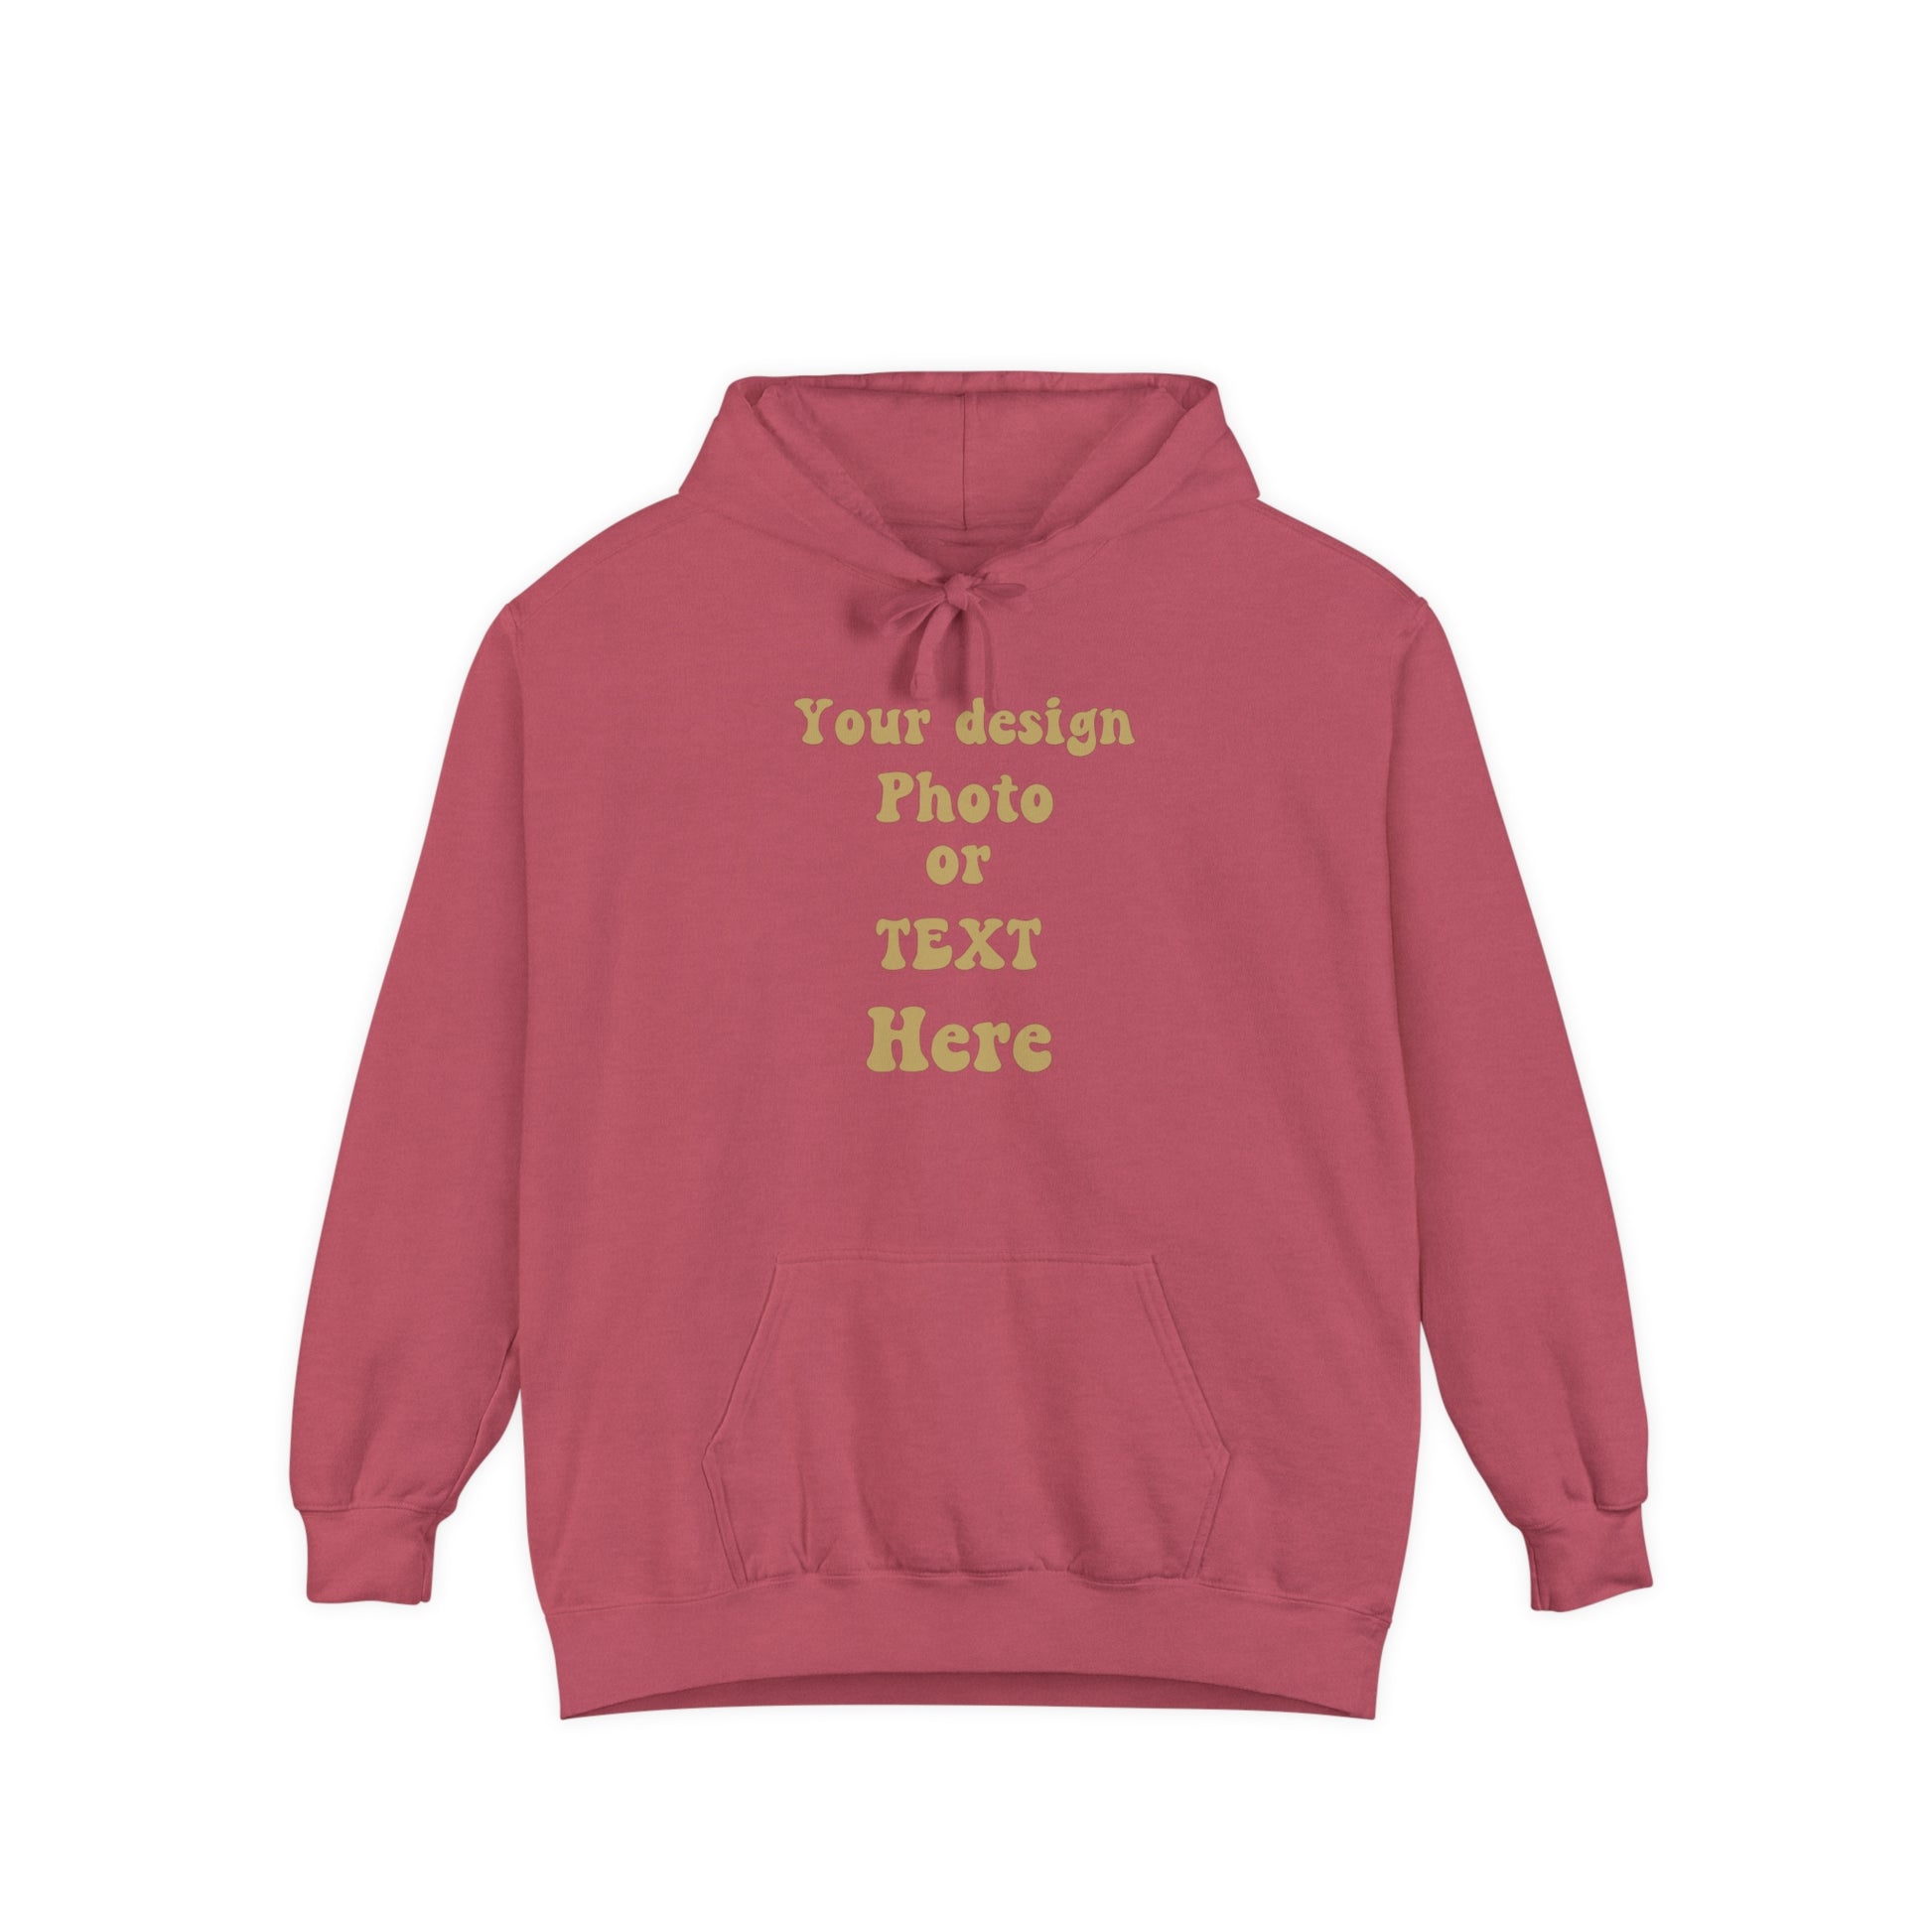 Luxury Hoodie - Personalize with Your Design, Photo, or Text | Greatest Comfort Hoodie Crimson S 